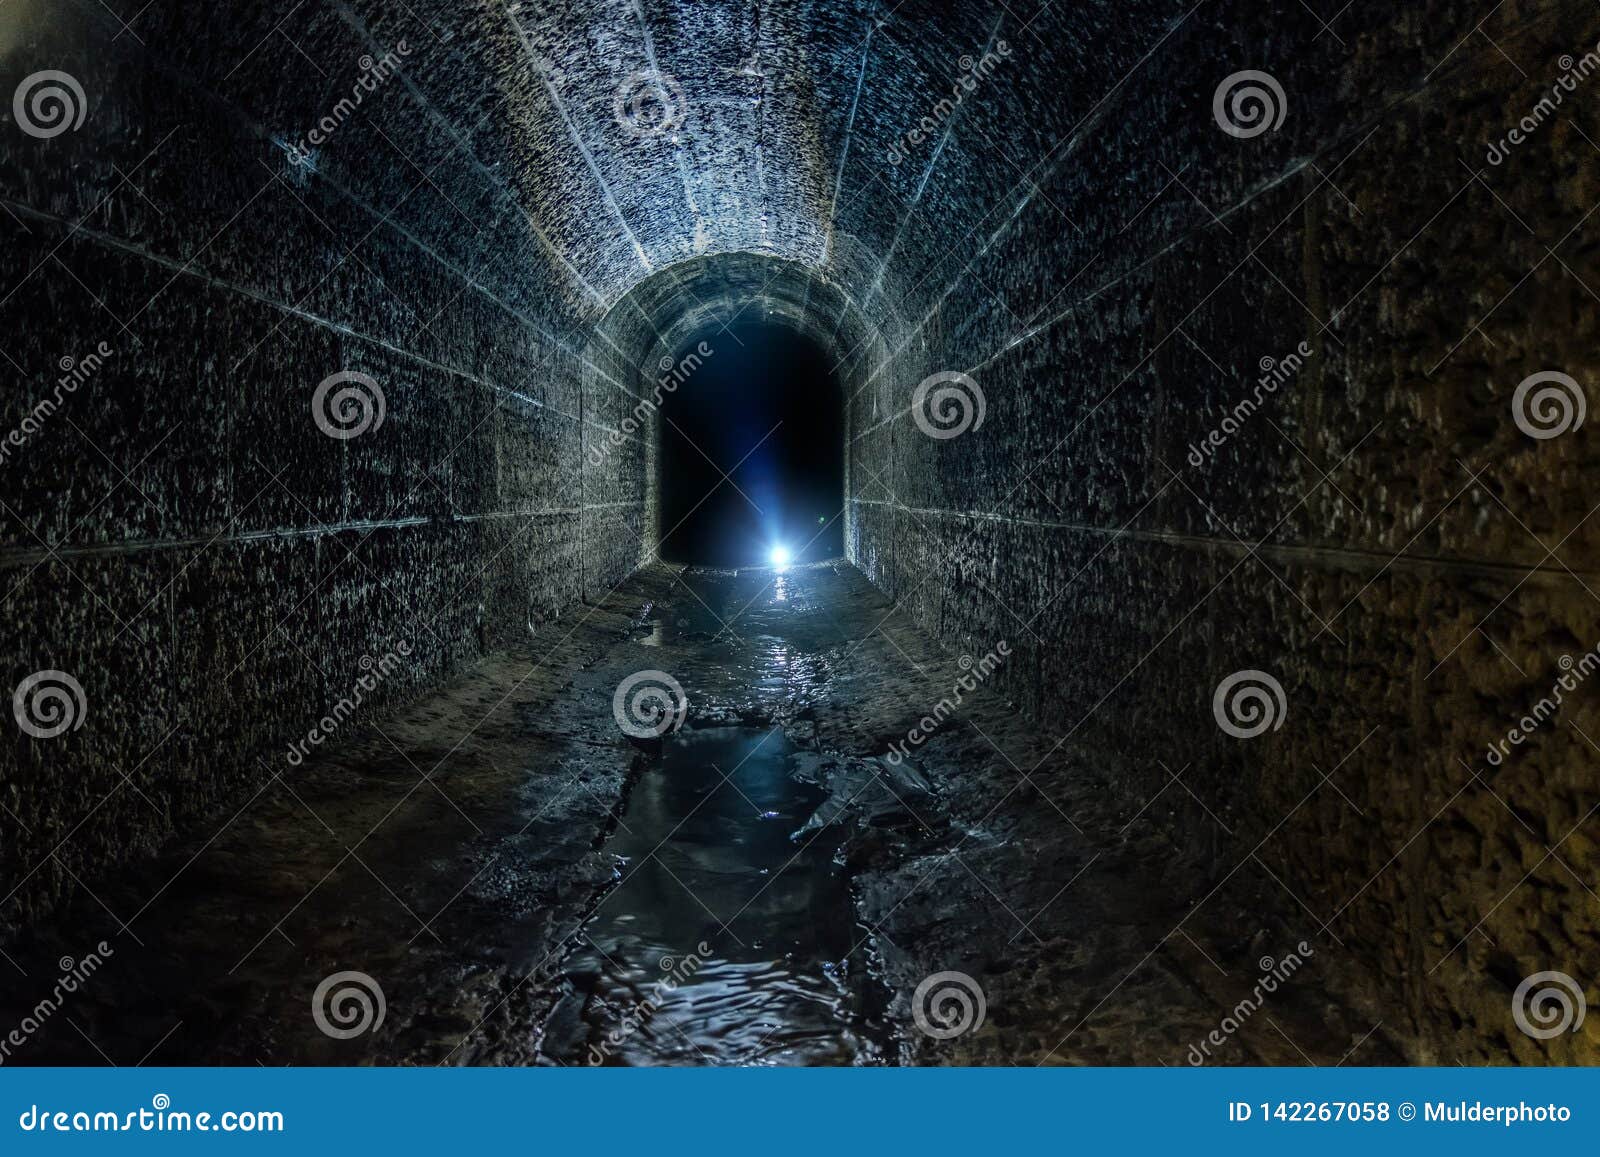 dark and creepy old historical vaulted flooded underground drainage tunnel